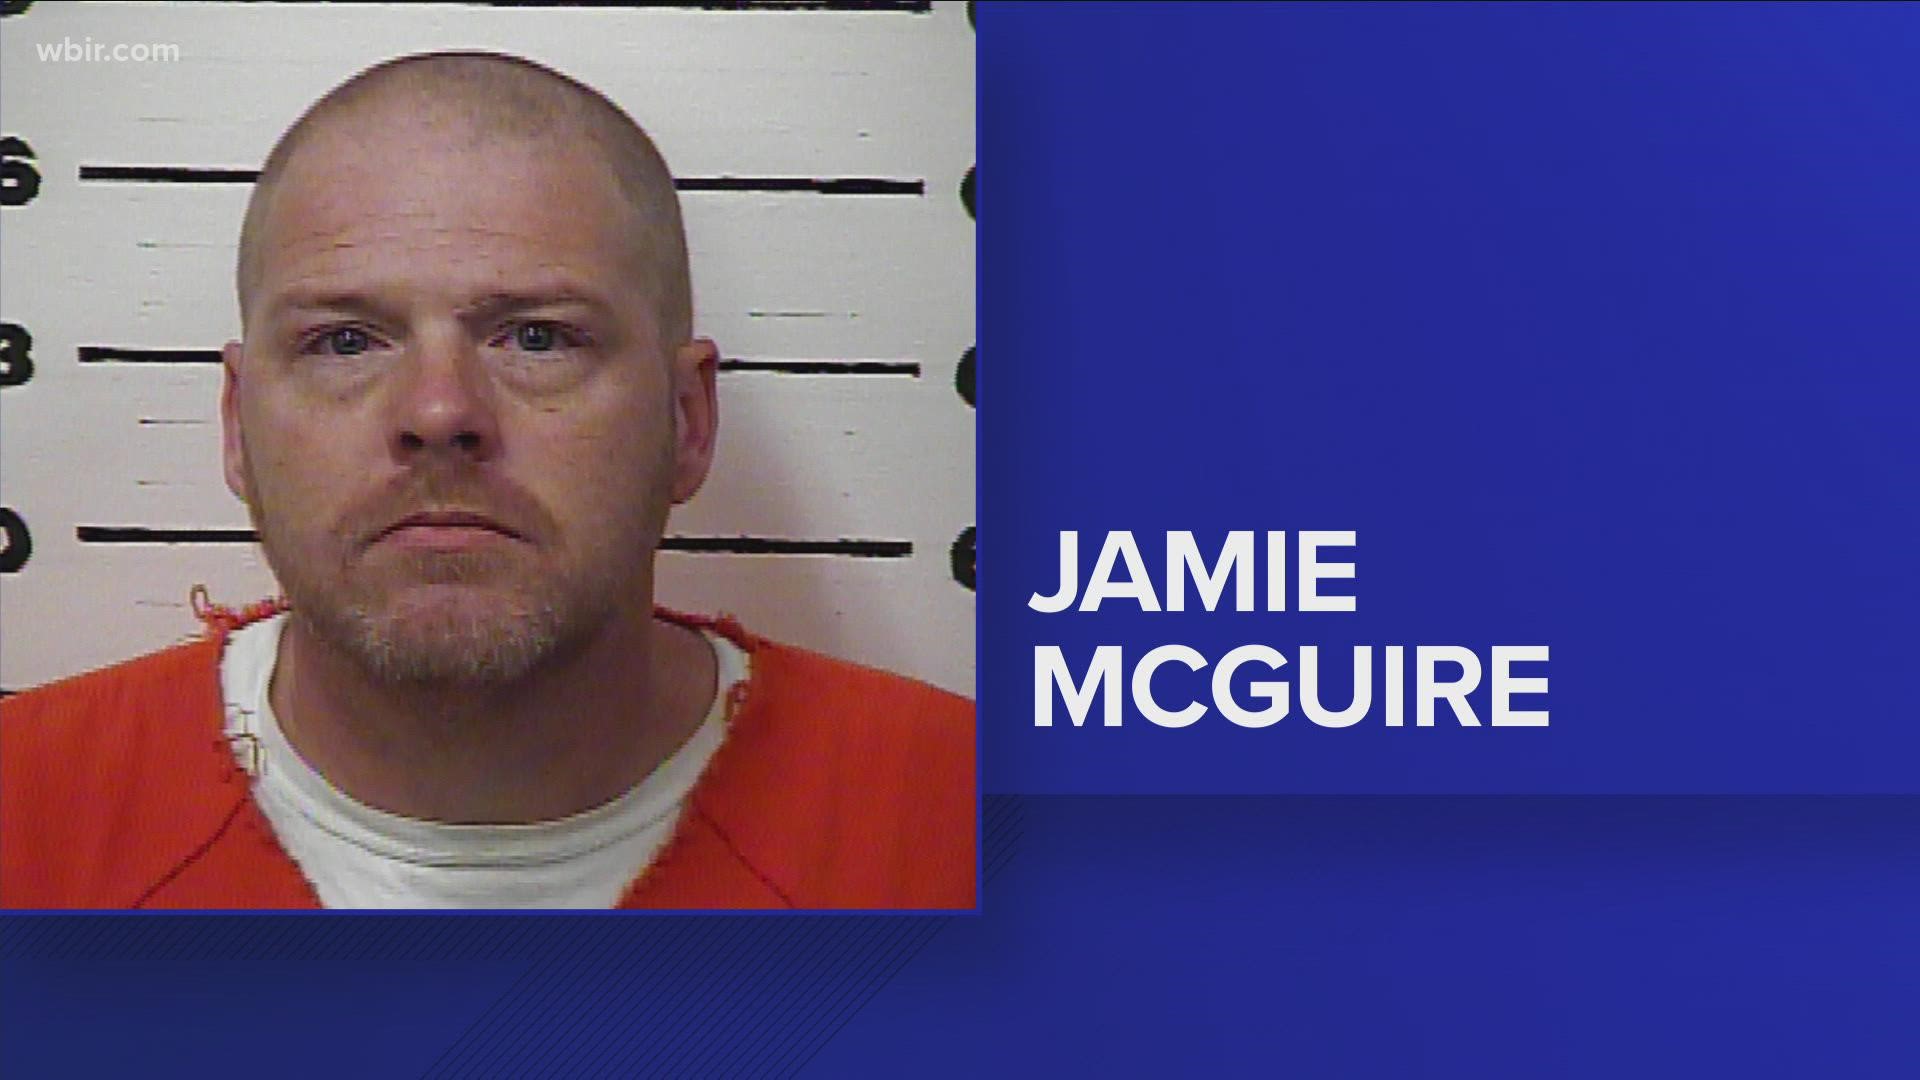 Over several hours of negotiations, Jamie L. McGuire stepped outside of his house numerous times and threatened officials, according to deputies.